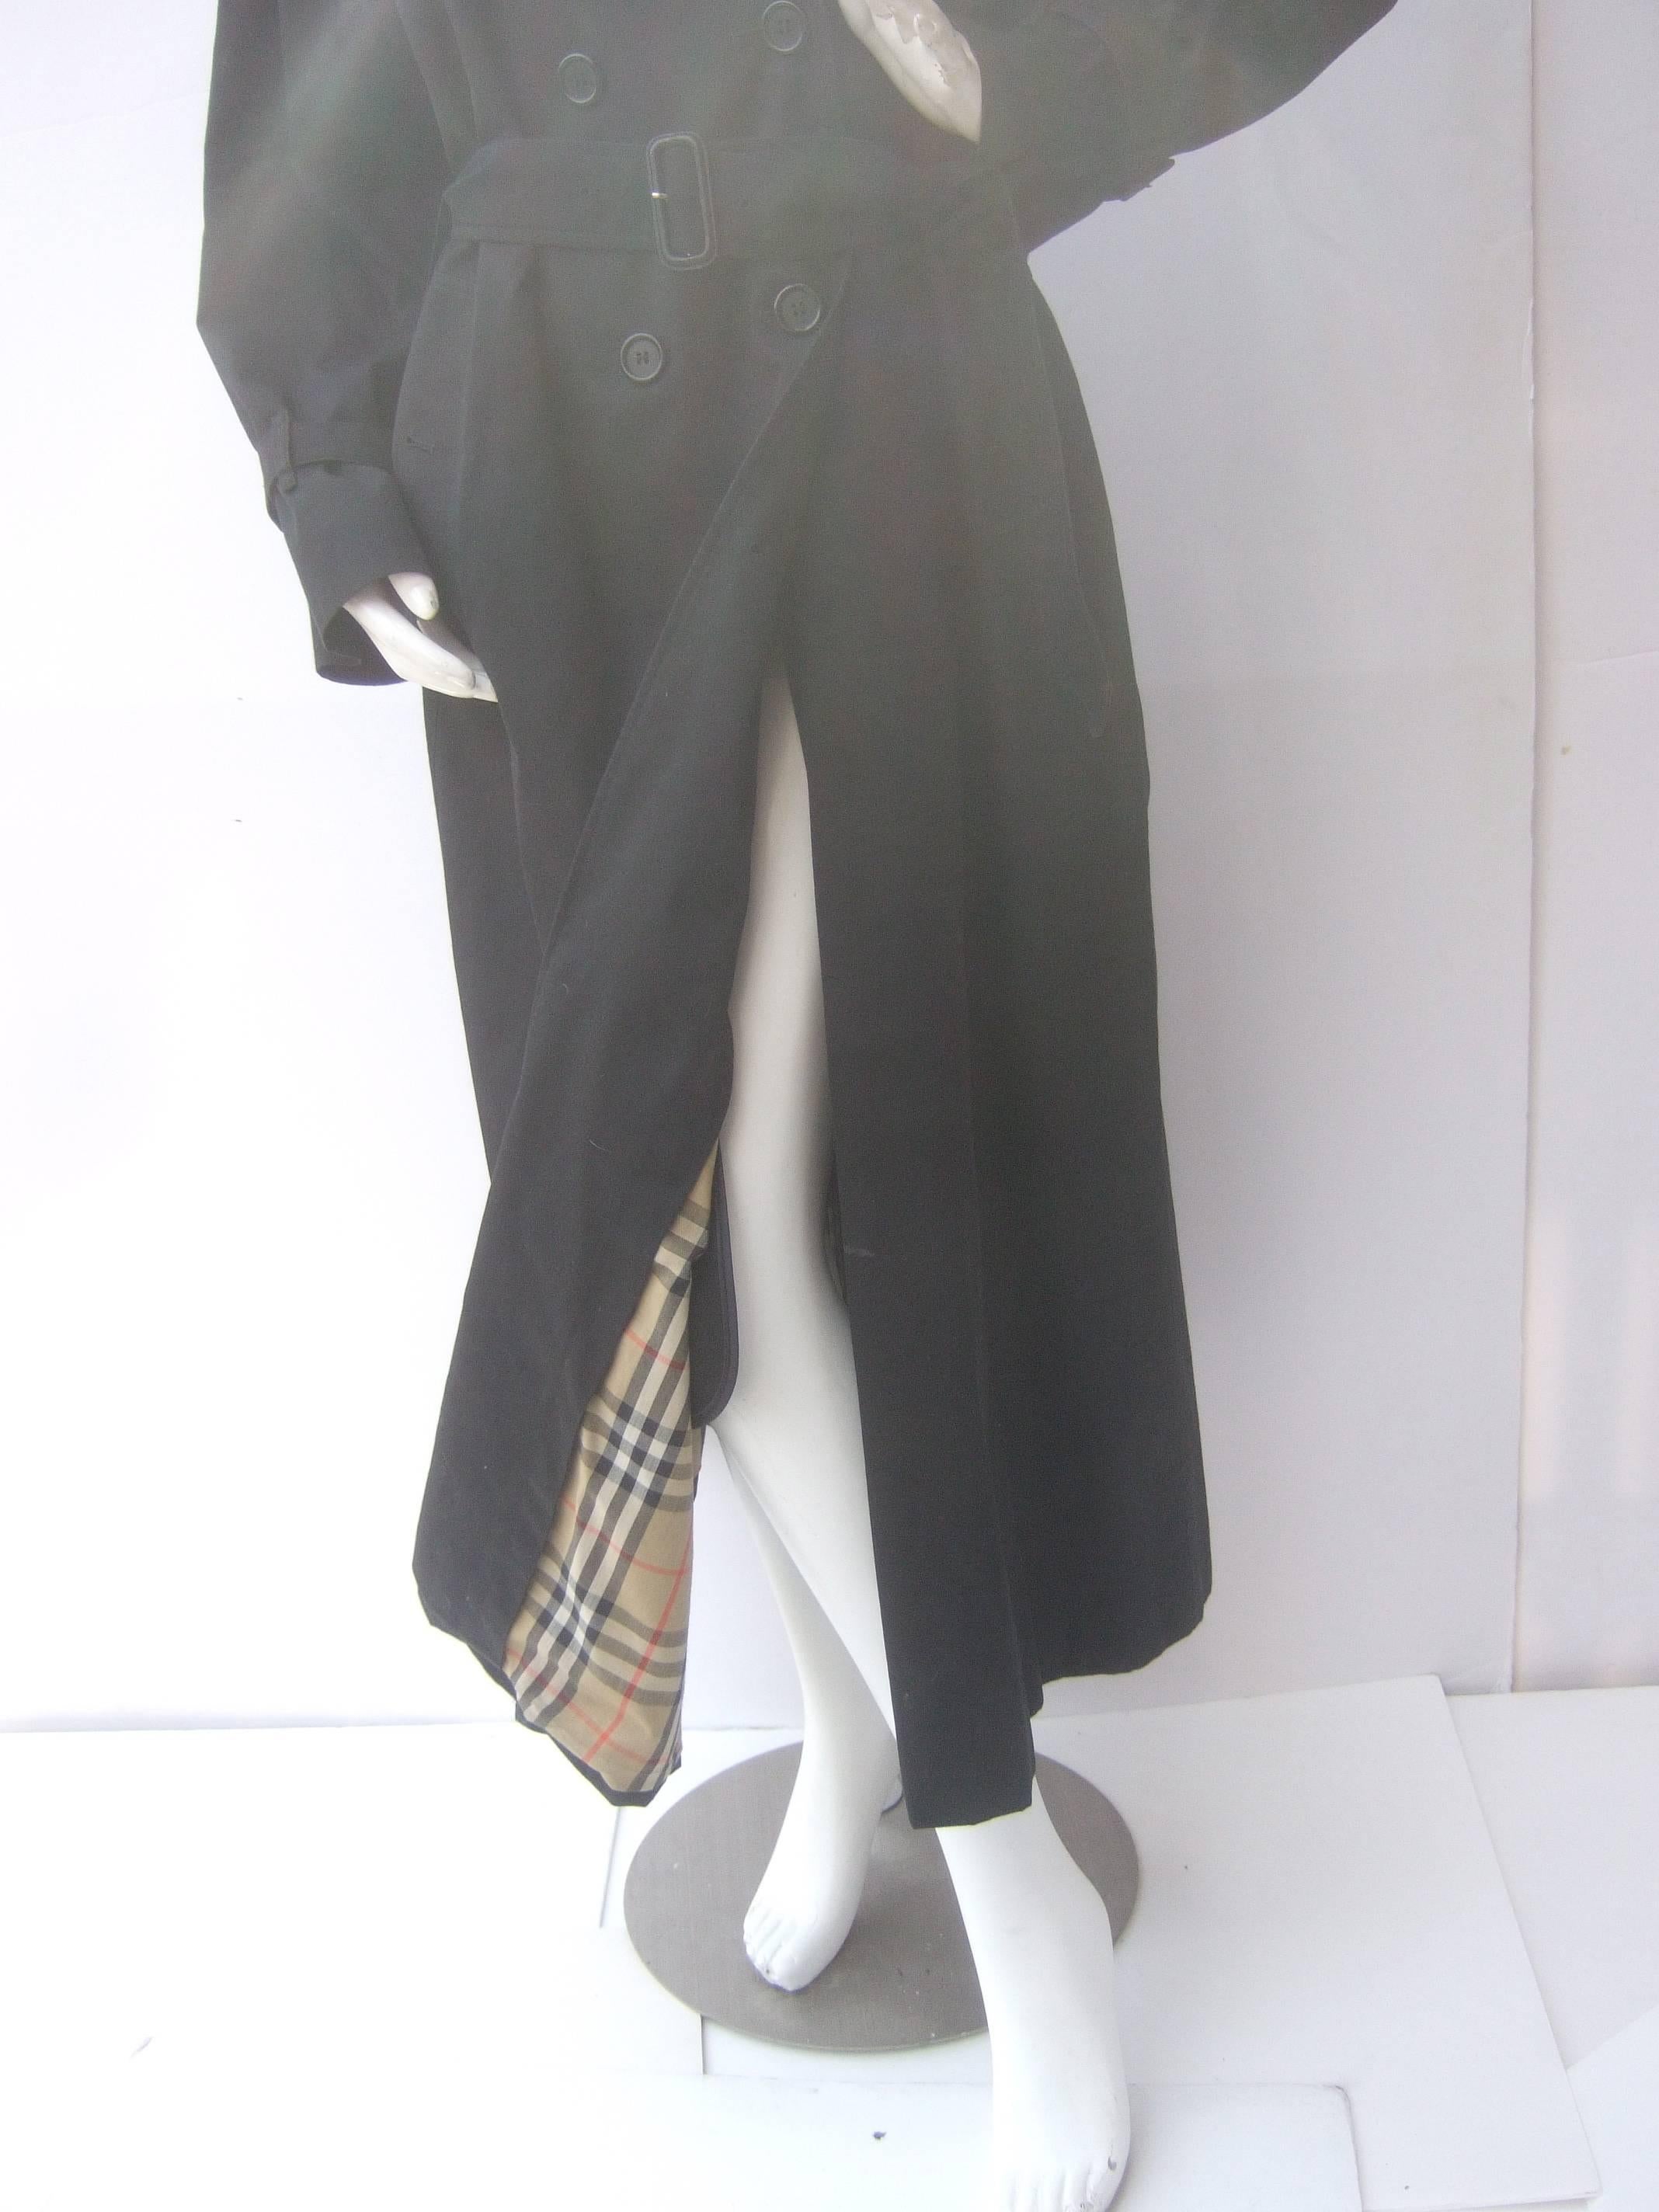 Burberry's Prorsum Vintage Women's Black Belted Trench Coach Size 10 X X Long 1